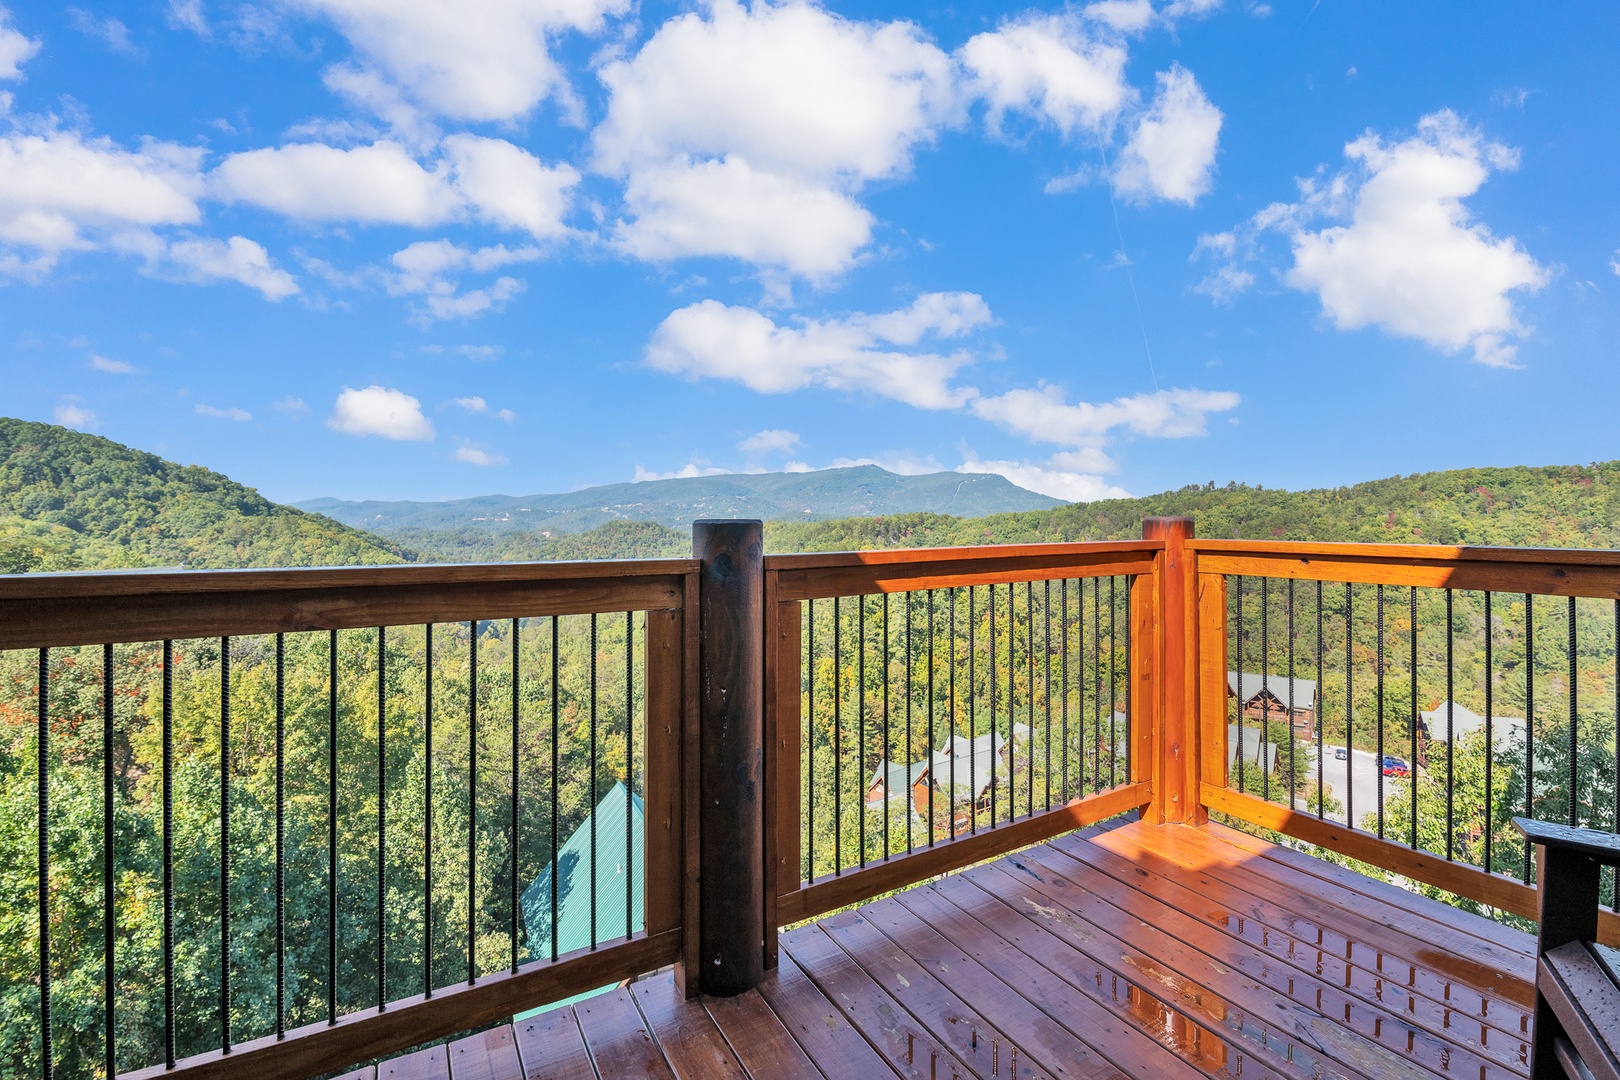 Every direction offers breathtaking views on this 3rd floor balcony